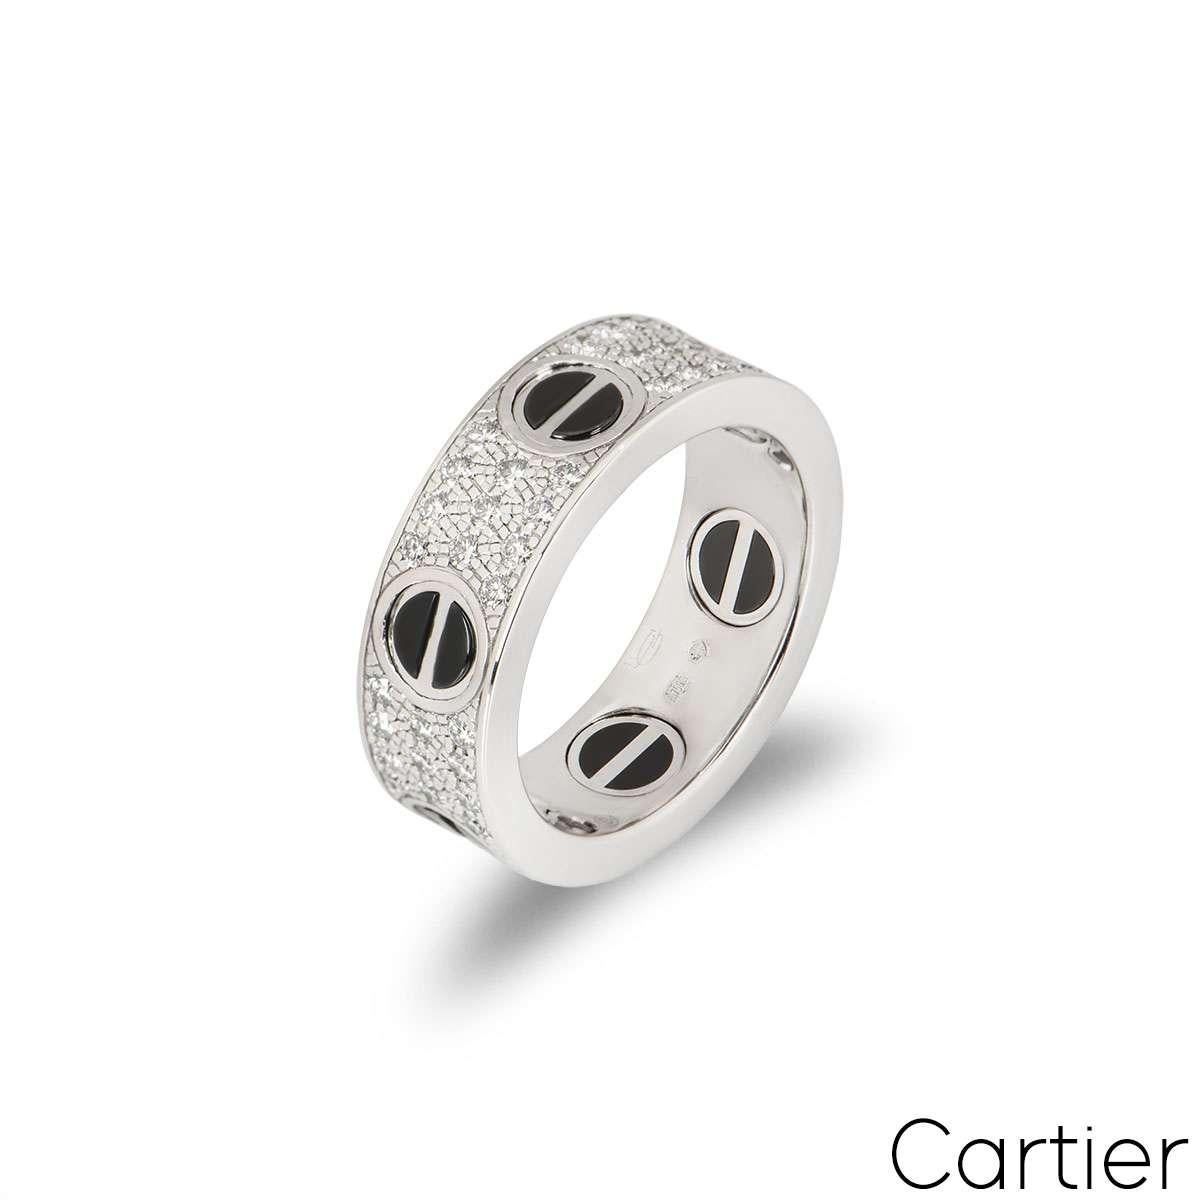 An 18k white gold diamond Love ring by Cartier. The ring features the iconic Cartier screws featuring a ceramic inlay and has 66 pave set, round brilliant cut diamonds set between each screw, totalling 0.74ct. Measuring 6.5mm in width and a UK size